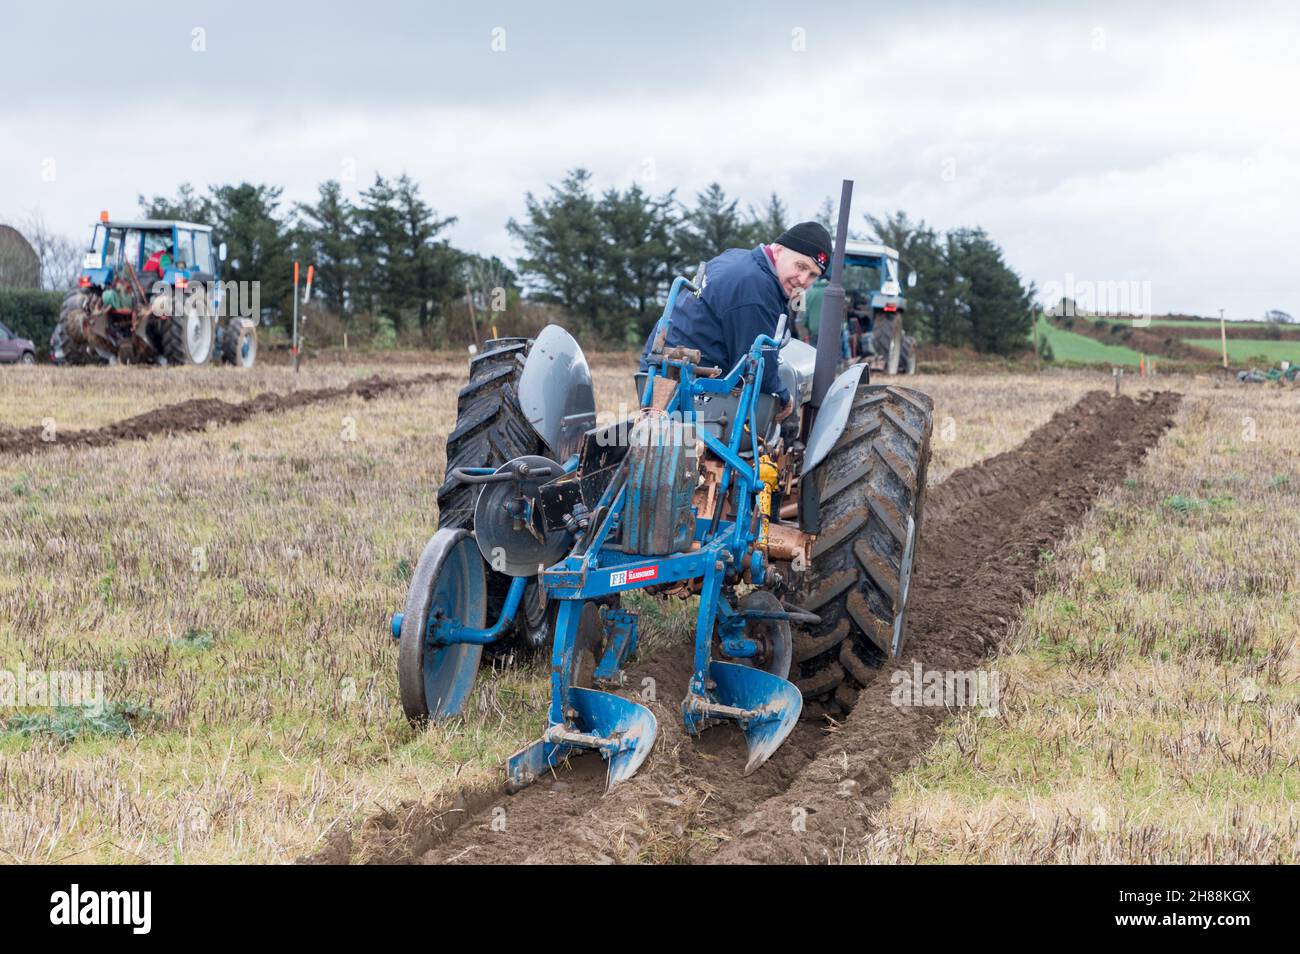 Cahermore, West Cork, Ireland. 28th November, 2021. Denis Cummings from Bandon with his 1956 Fergusion 35 taking part in the Cork West Ploughing Association match on the land of Geoffery Wycherley, Cahermore, West Cork, Ireland. - Credit: David Creedon/Alamy Live News Stock Photo